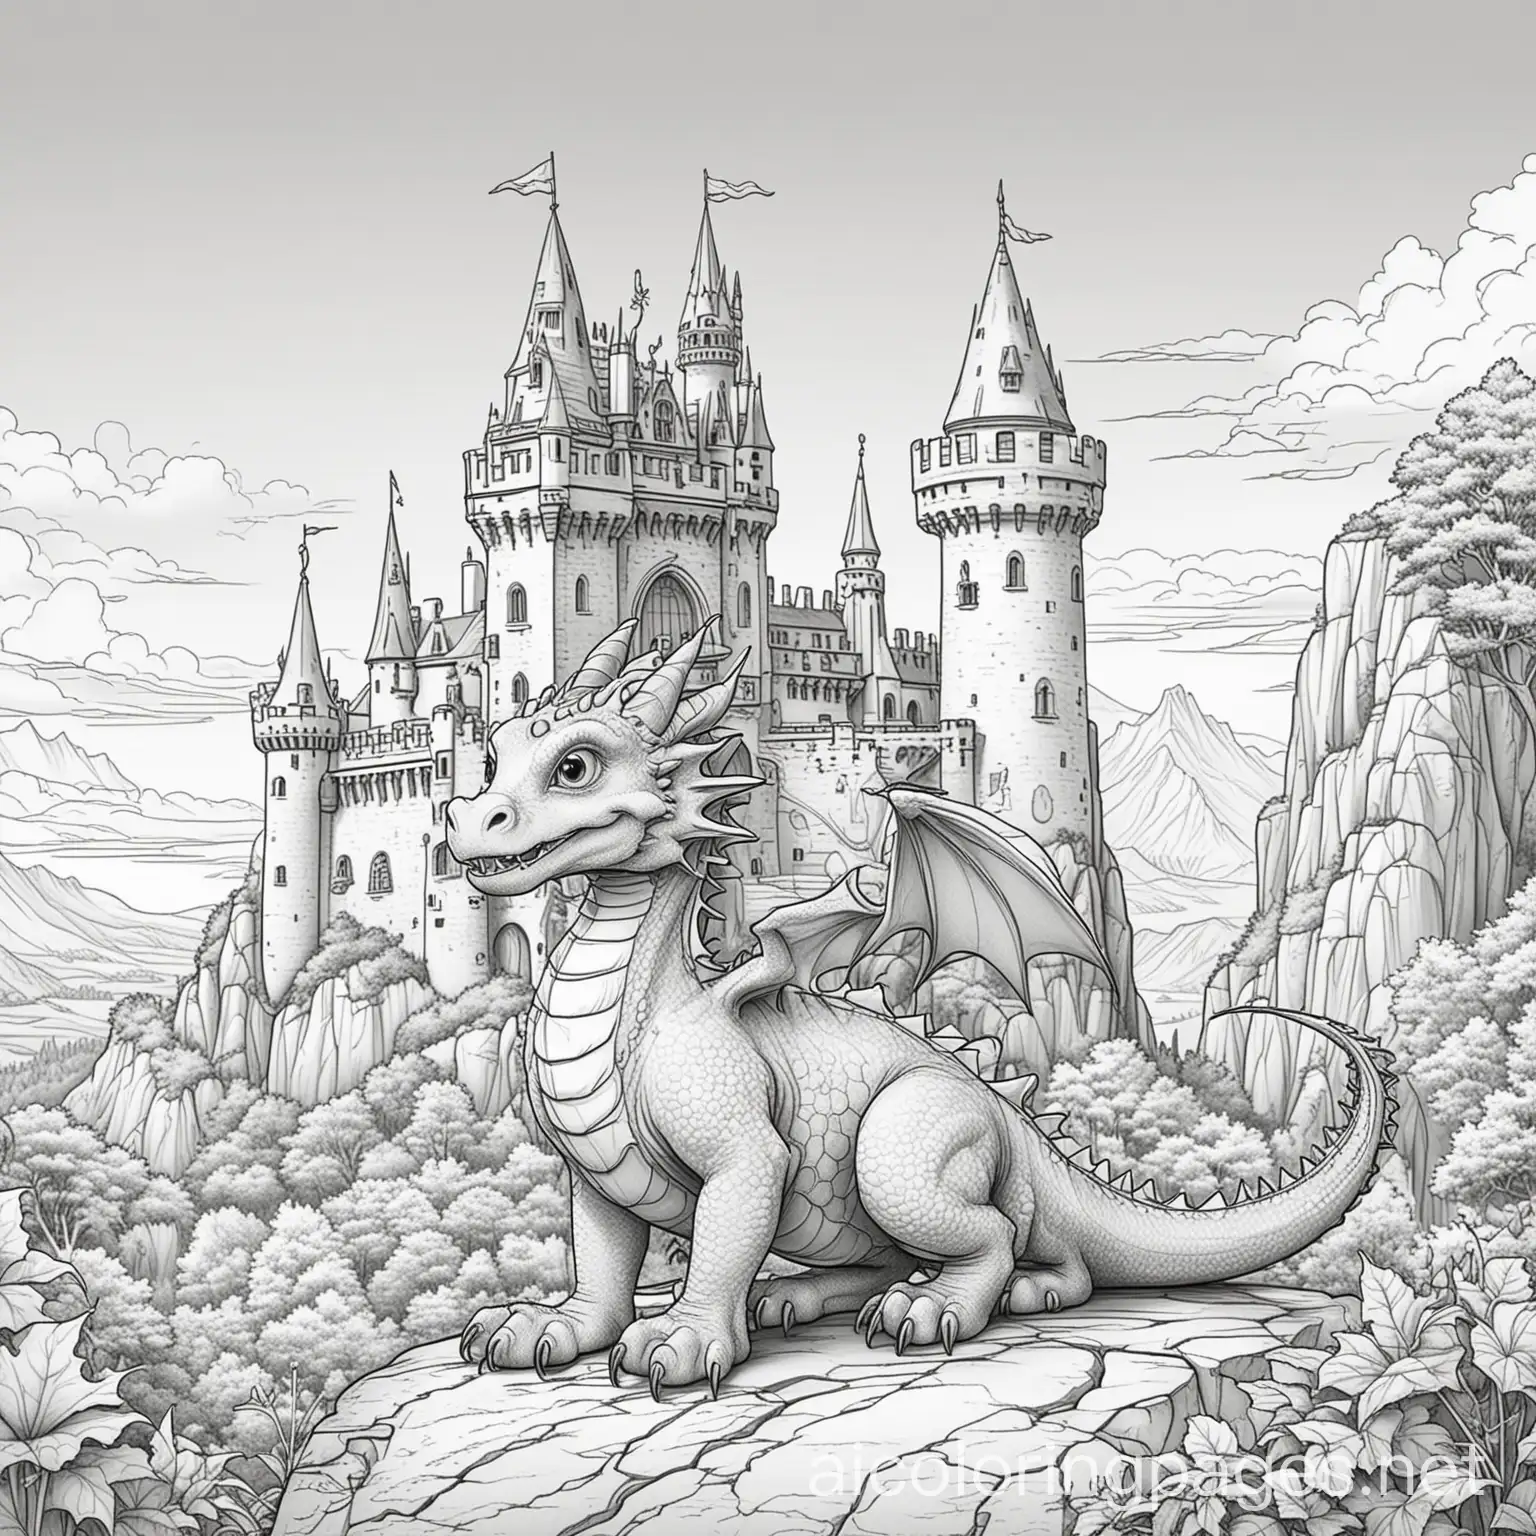 A cute friendly dragon in front of a castle
, Coloring Page, black and white, line art, white background, Simplicity, Ample White Space. The background of the coloring page is plain white to make it easy for young children to color within the lines. The outlines of all the subjects are easy to distinguish, making it simple for kids to color without too much difficulty